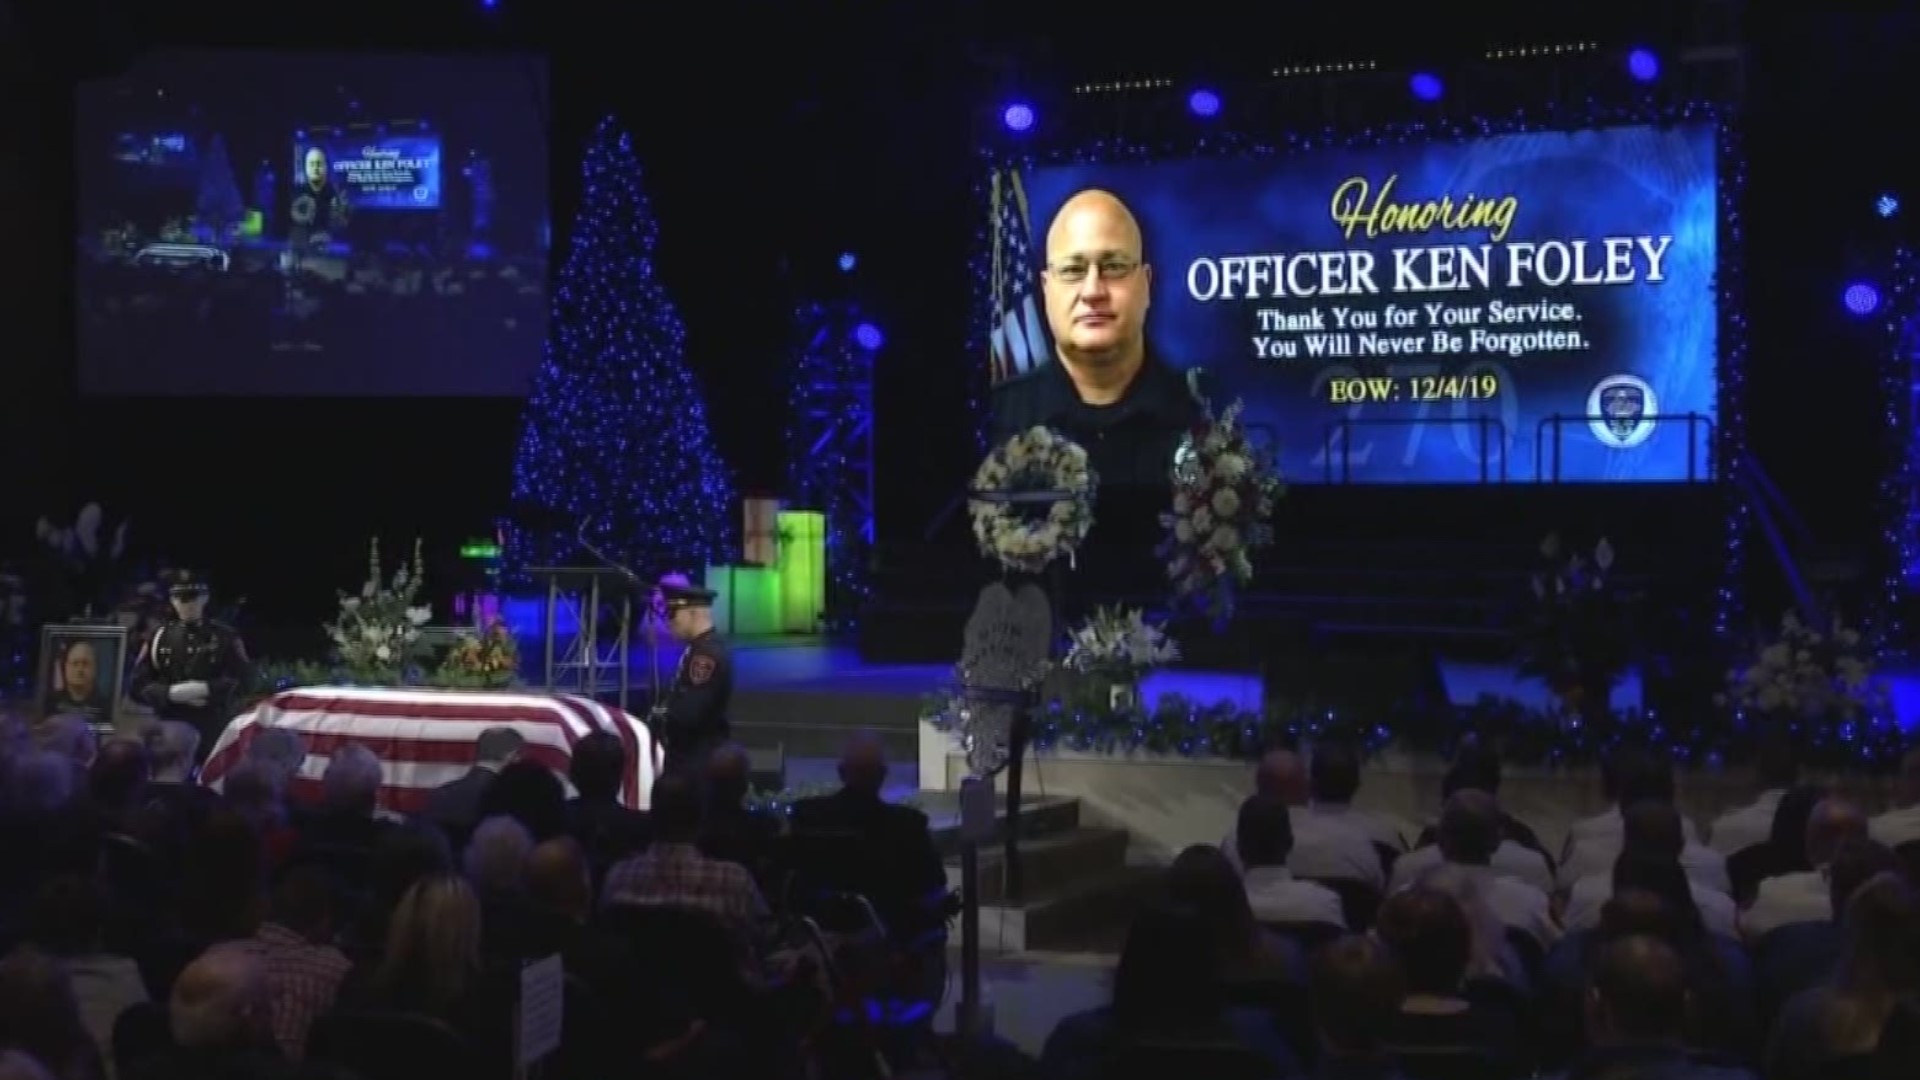 Police said a final goodbye to one of their own. Officer Ken Foley was laid to rest with honors, after serving the department for nearly three decades.